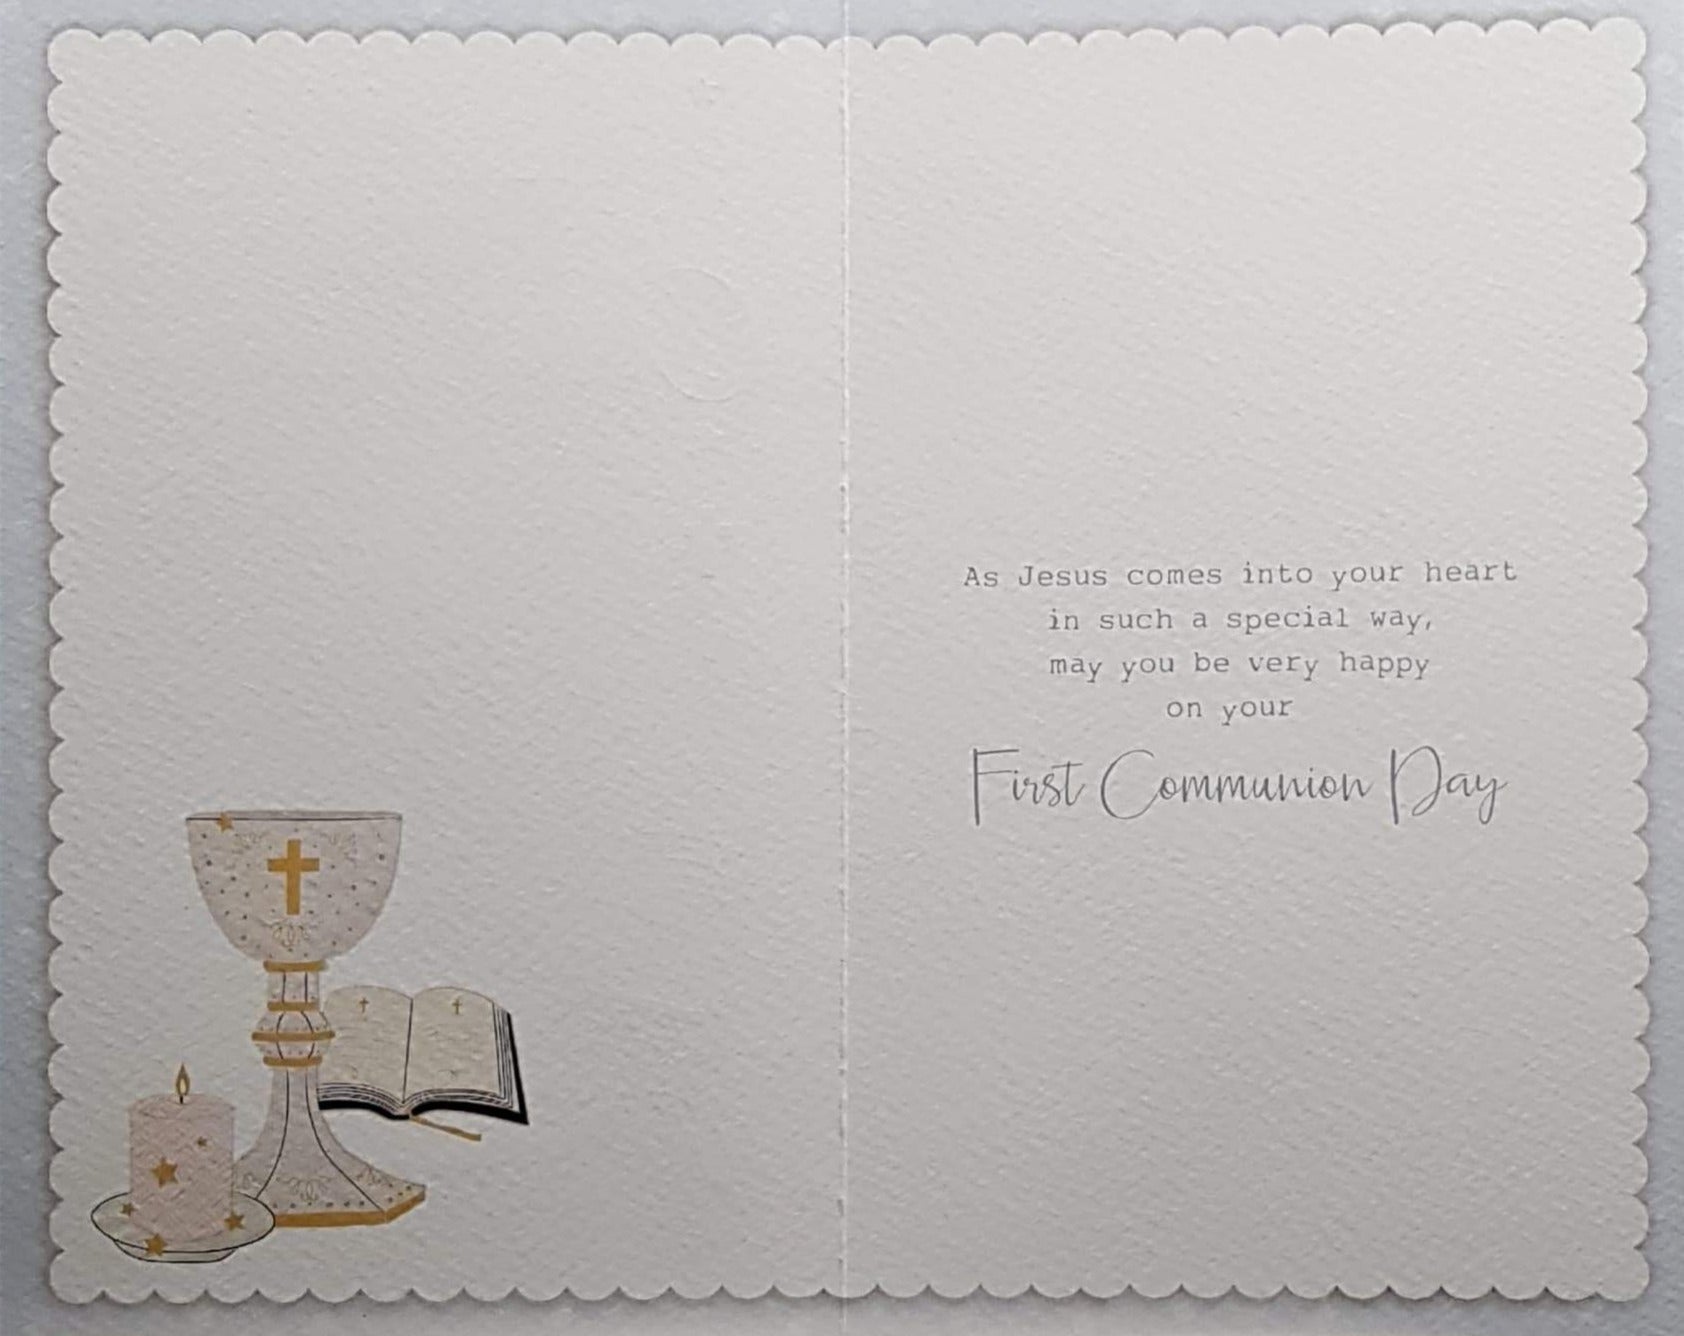 Communion Card - Gender Neutral - On Your First Communion & Bible, Chalice & Candle with Stars